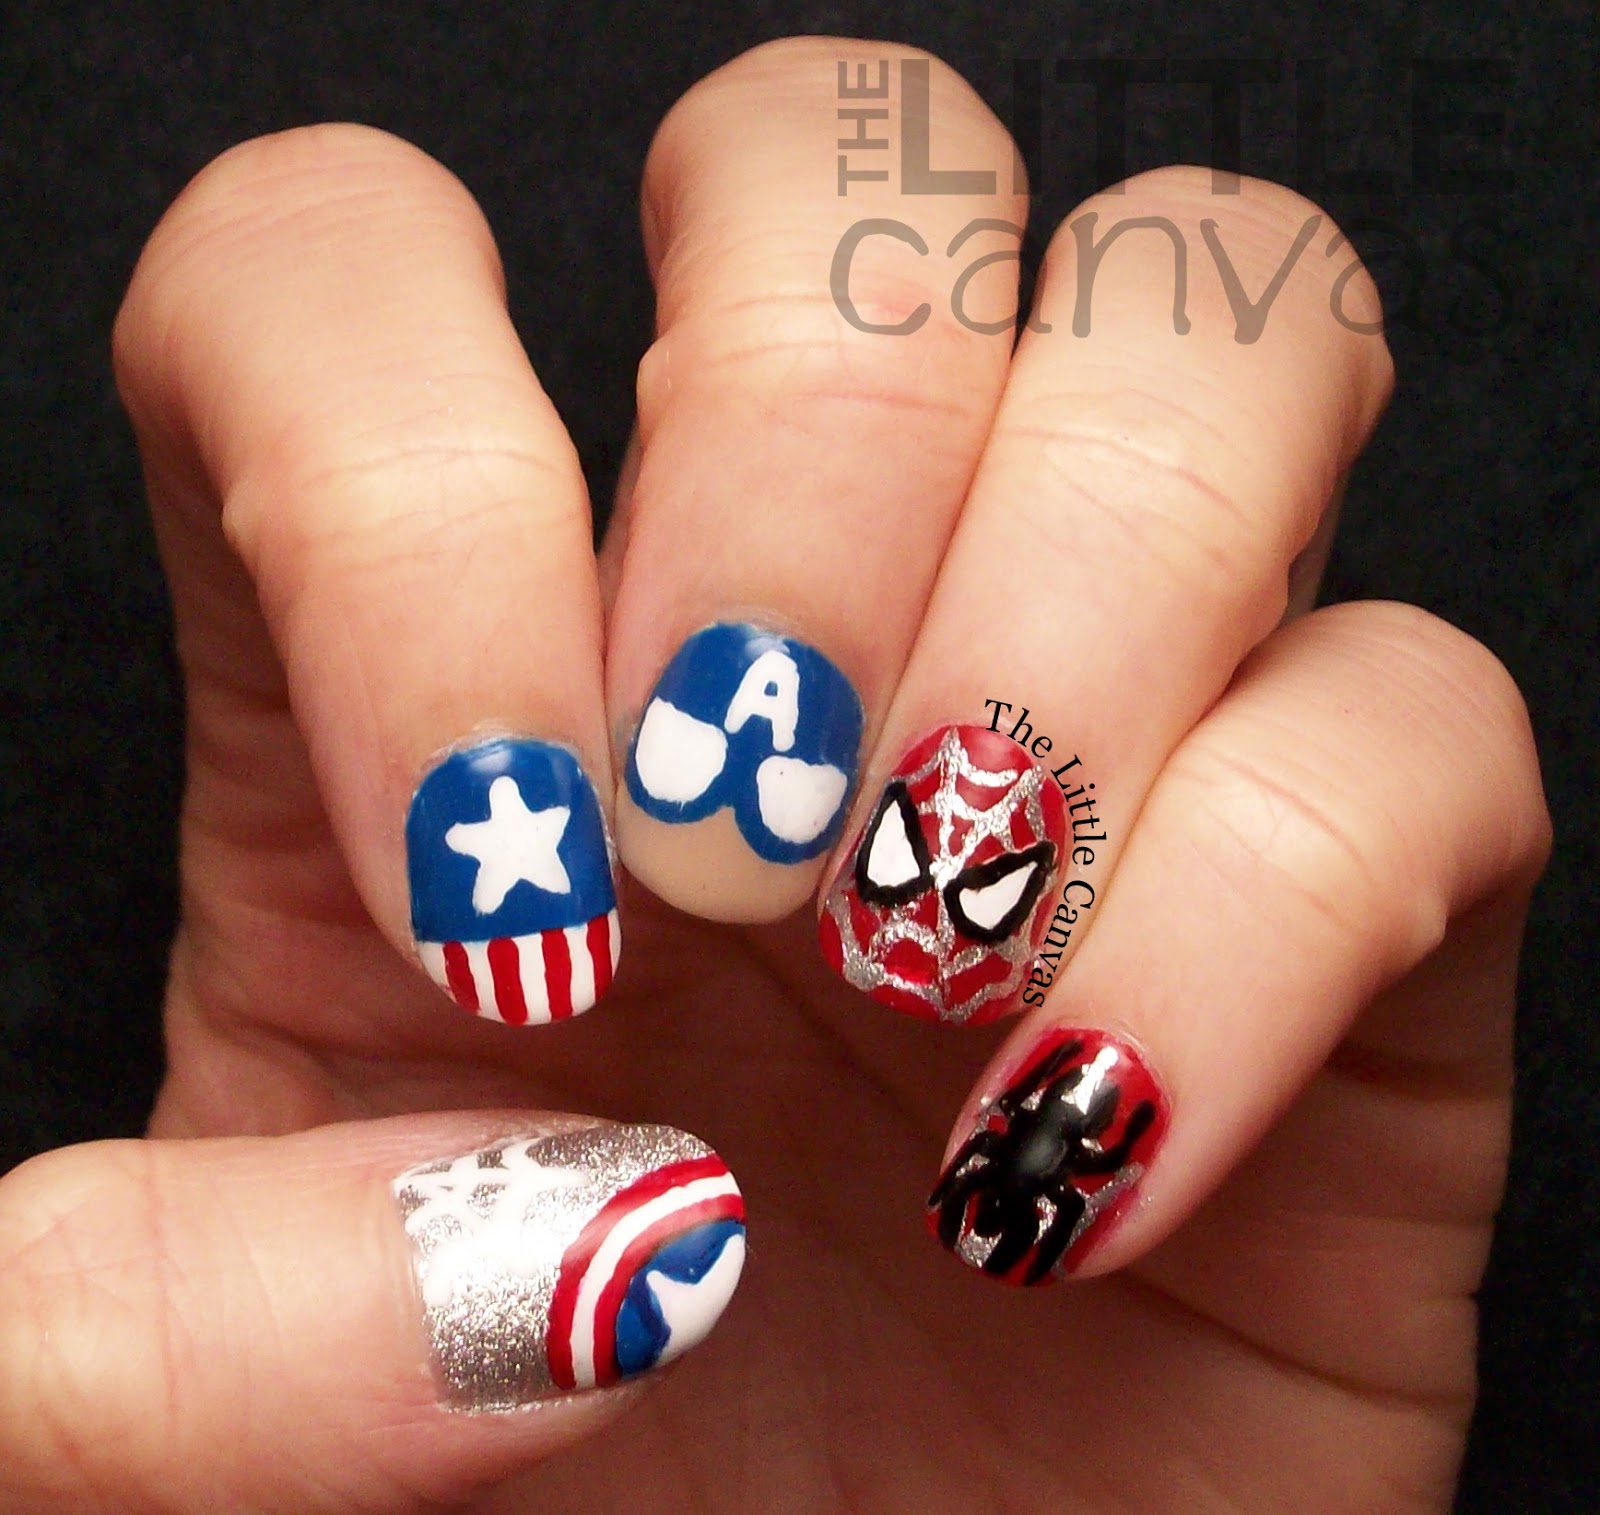 Spiderman Nail Art Tutorial - Step by Step Unedited - Extended Version -  YouTube